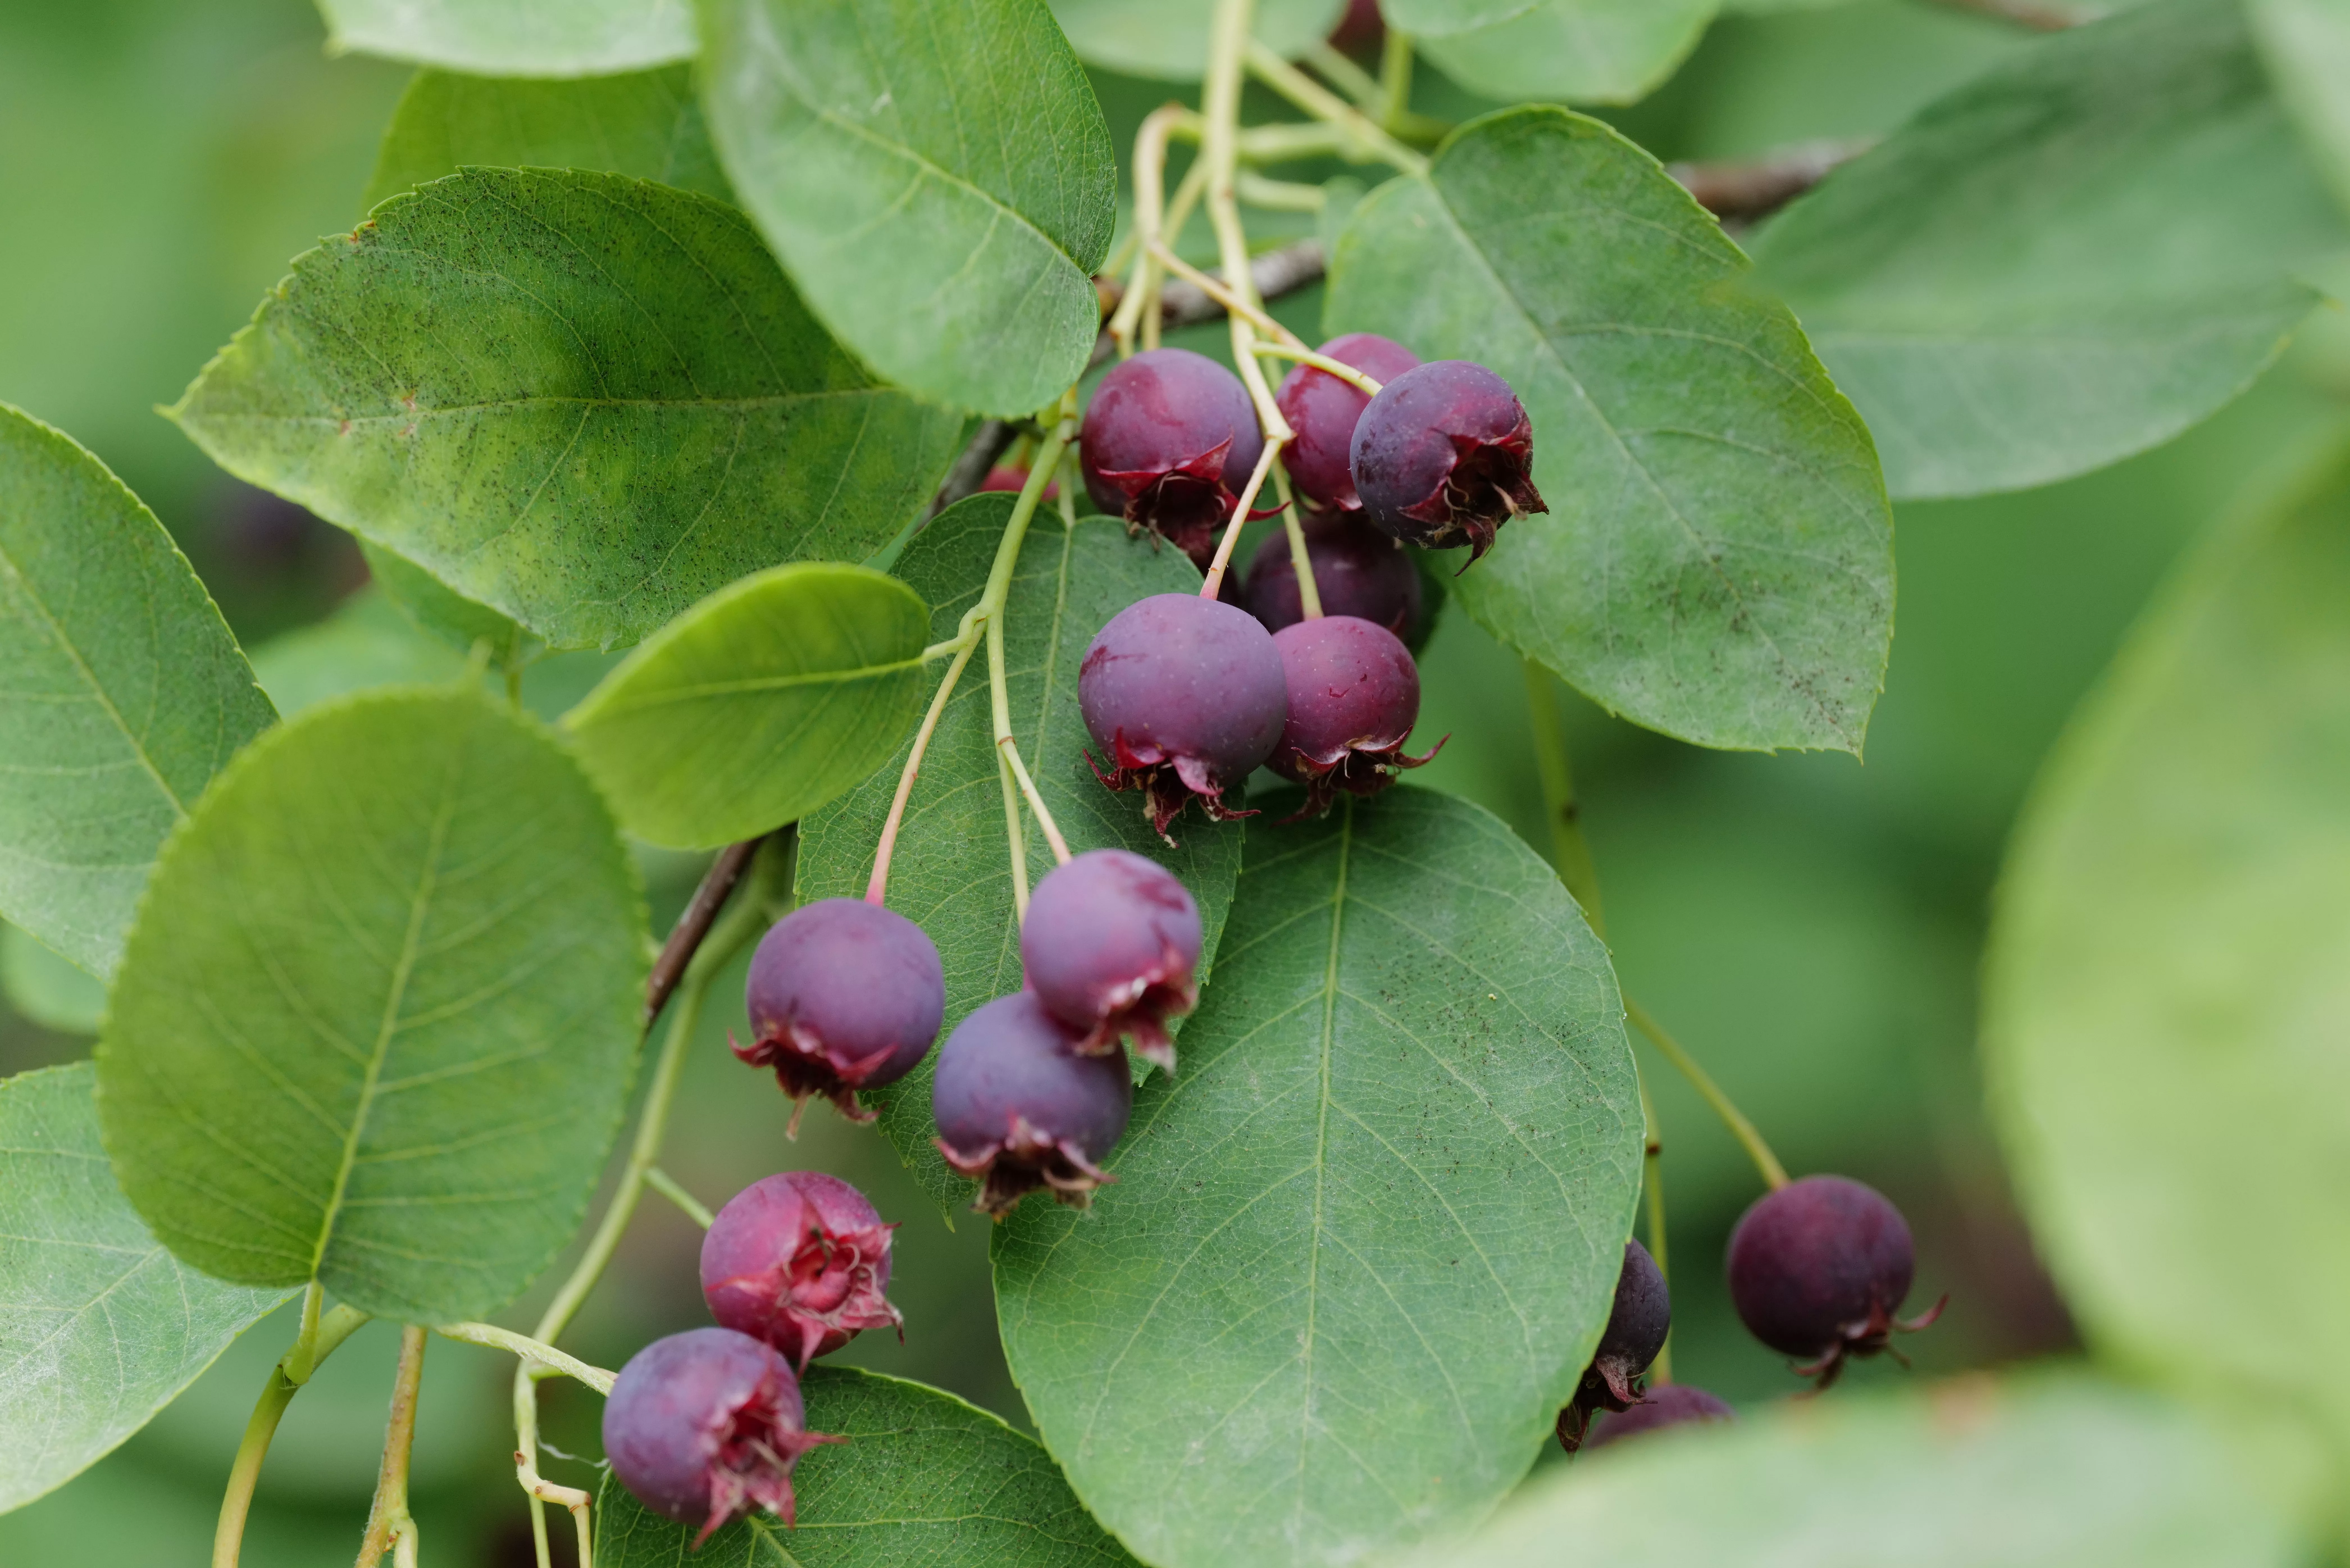 Serviceberry With Berries and Its Leaves